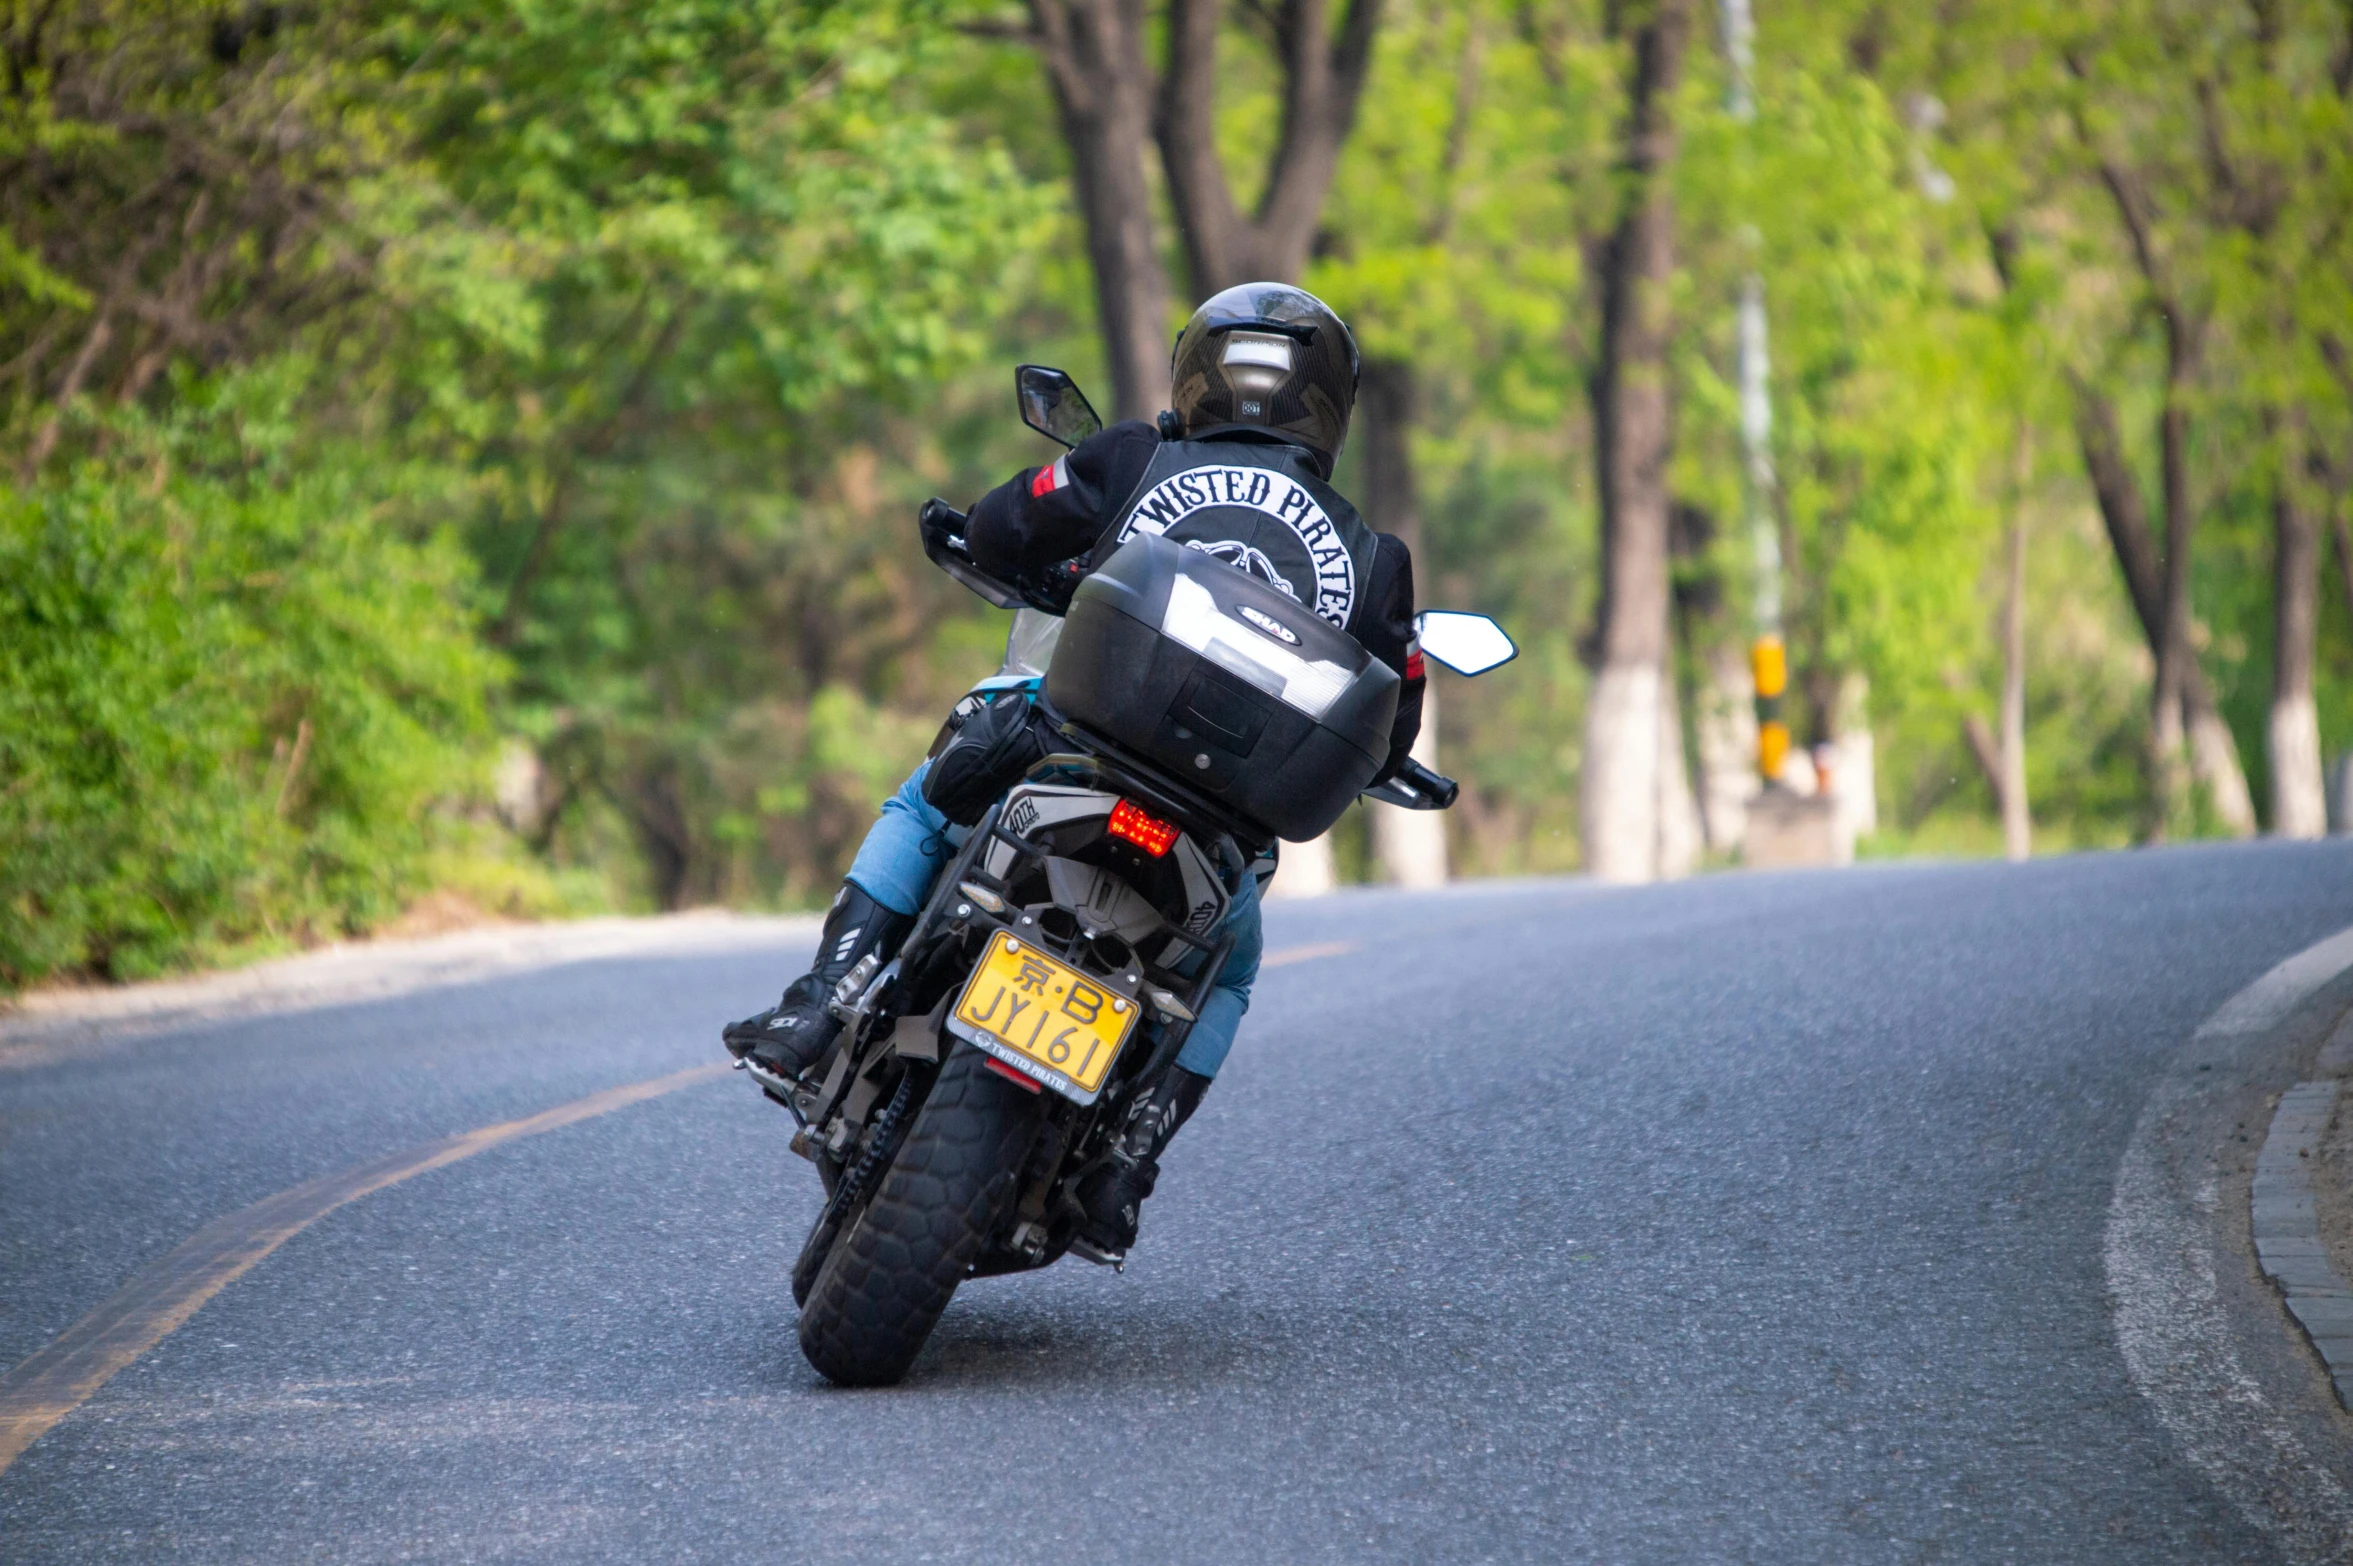 a person riding on the back of a blue motorcycle